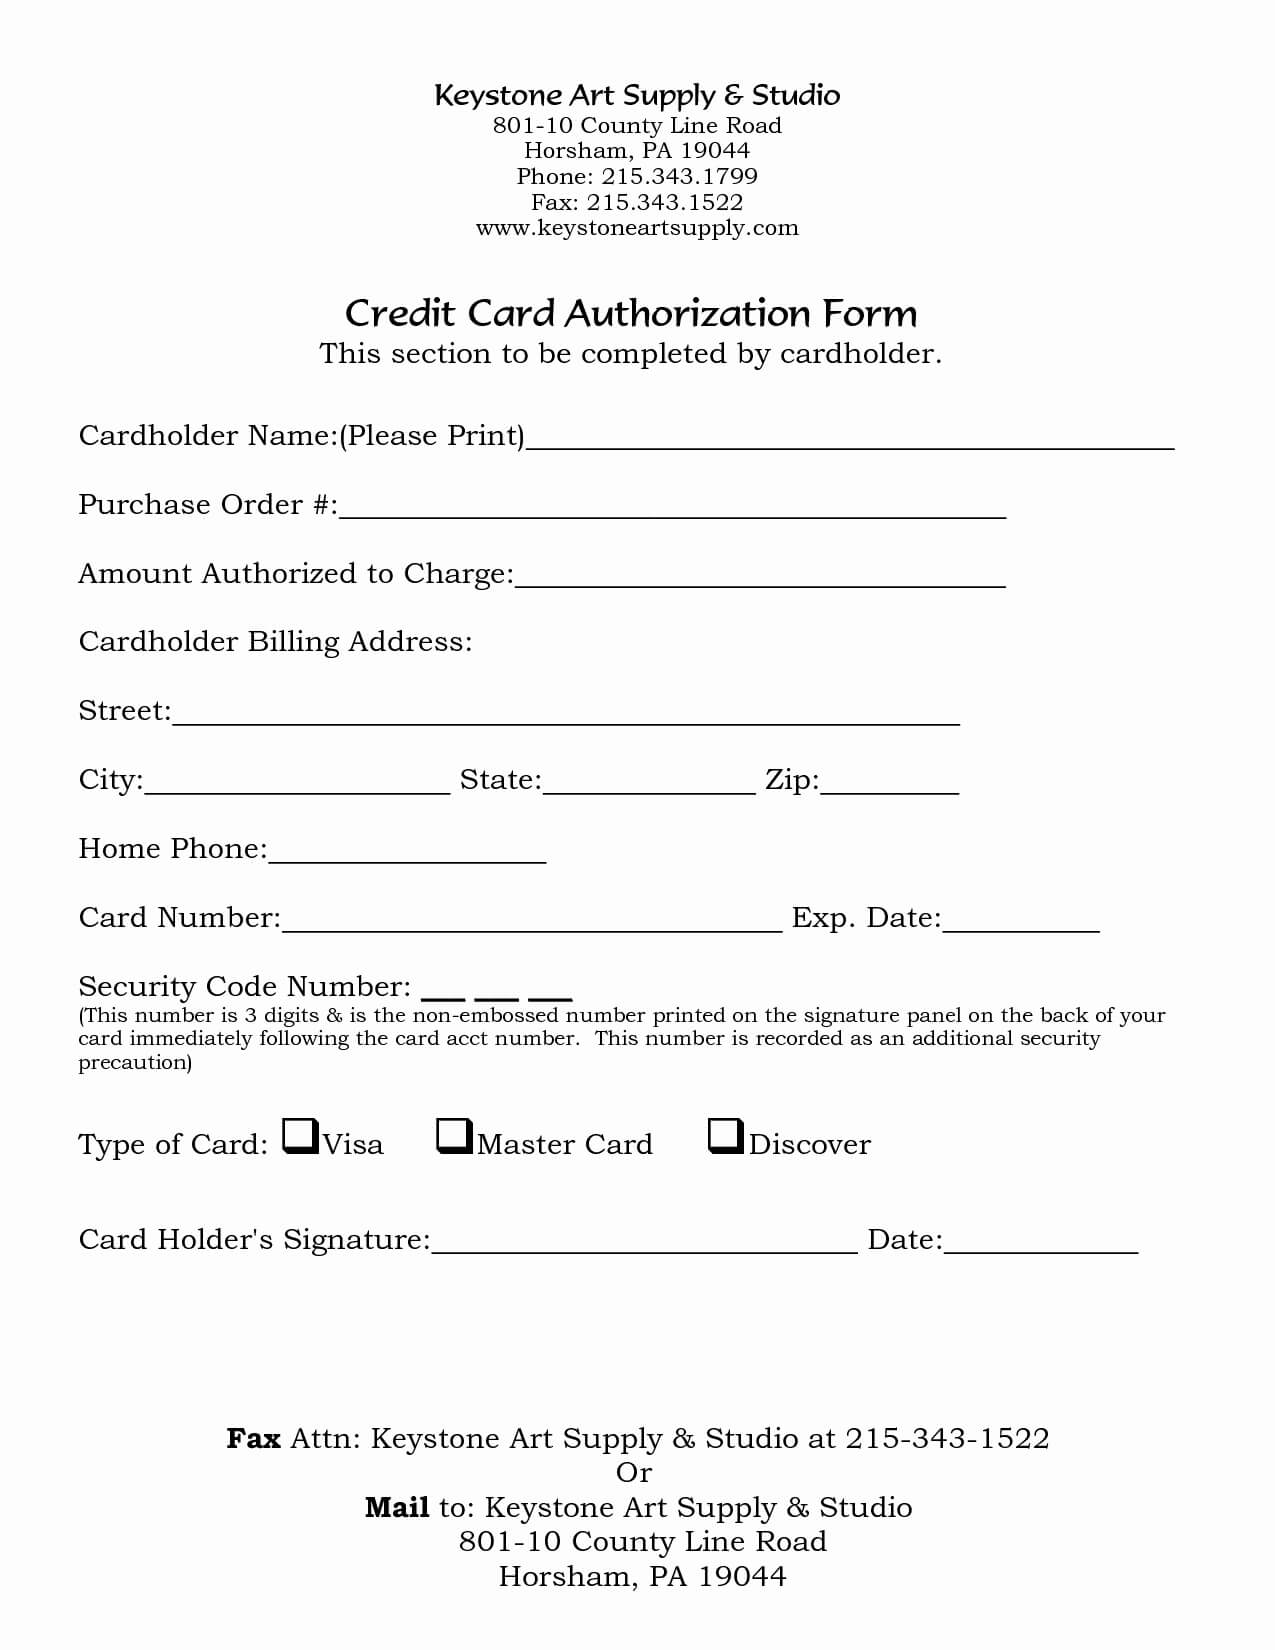 Credit Card Payment Form Federal Circuit Court Of Australia For Credit Card Payment Form Template Pdf